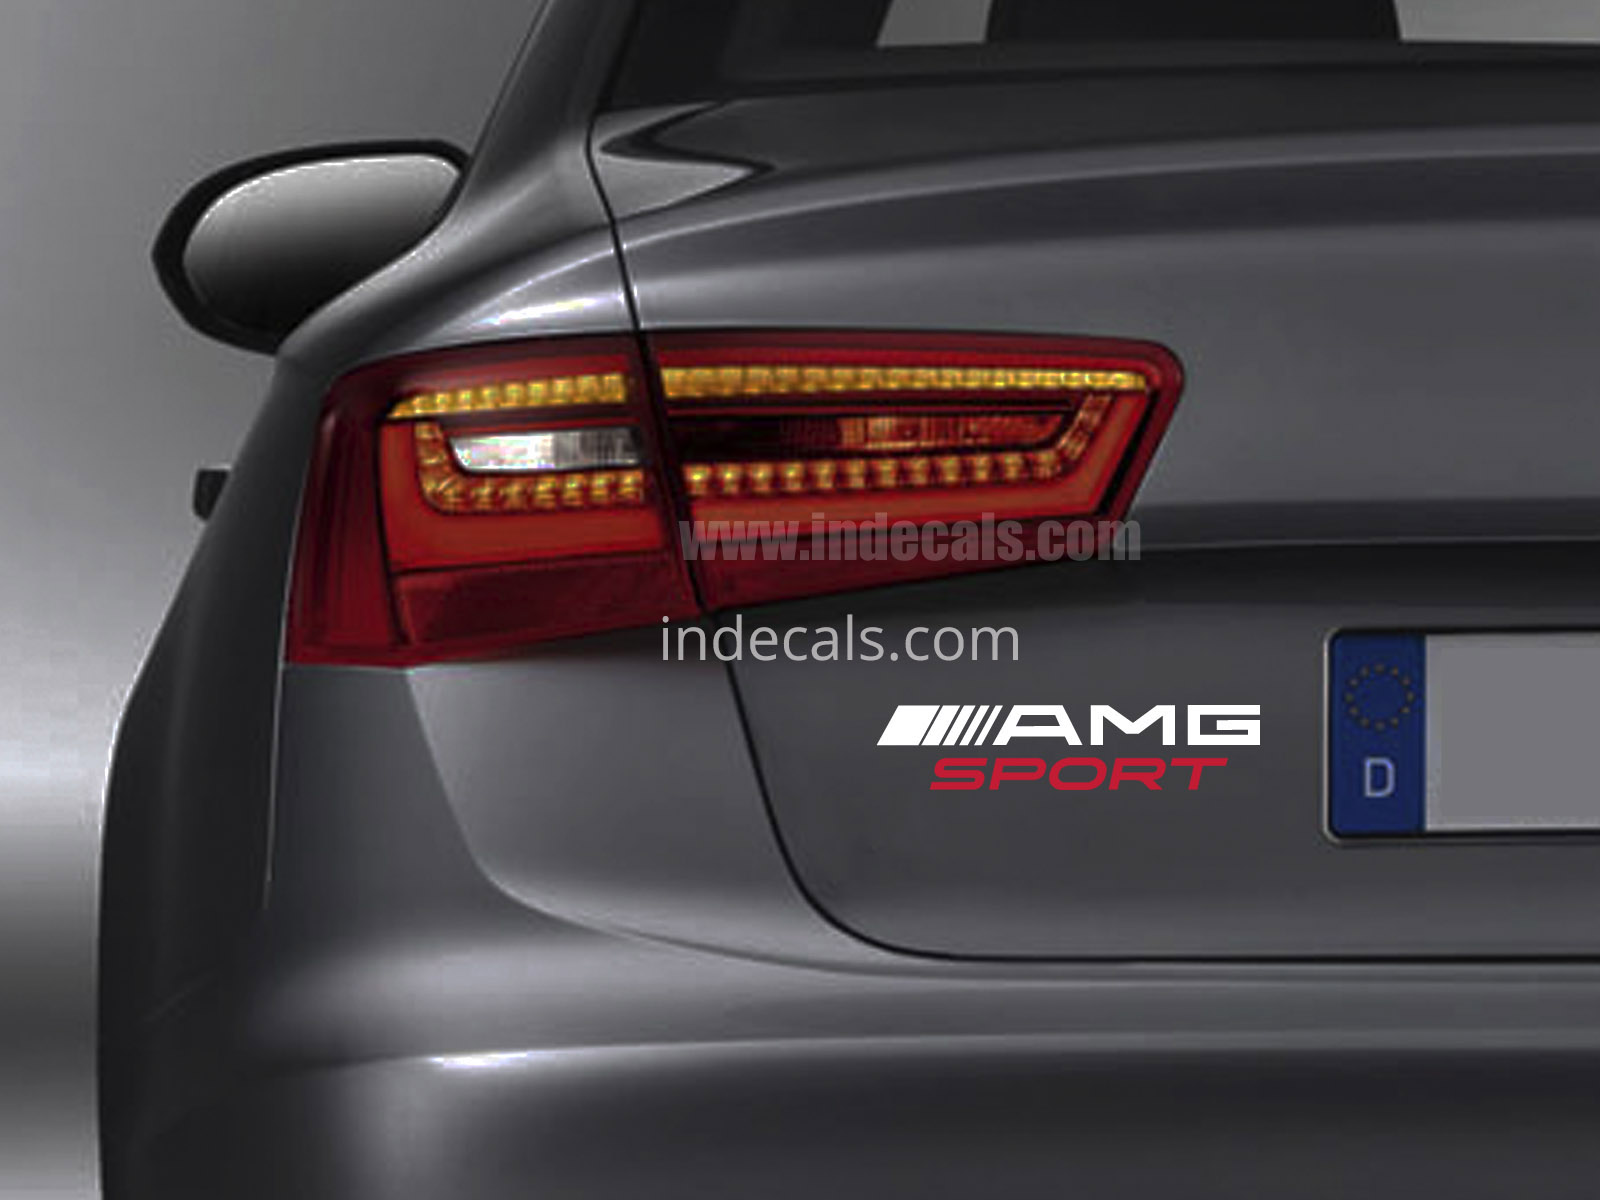 1 x AMG Sports Sticker for Trunk - White & Red